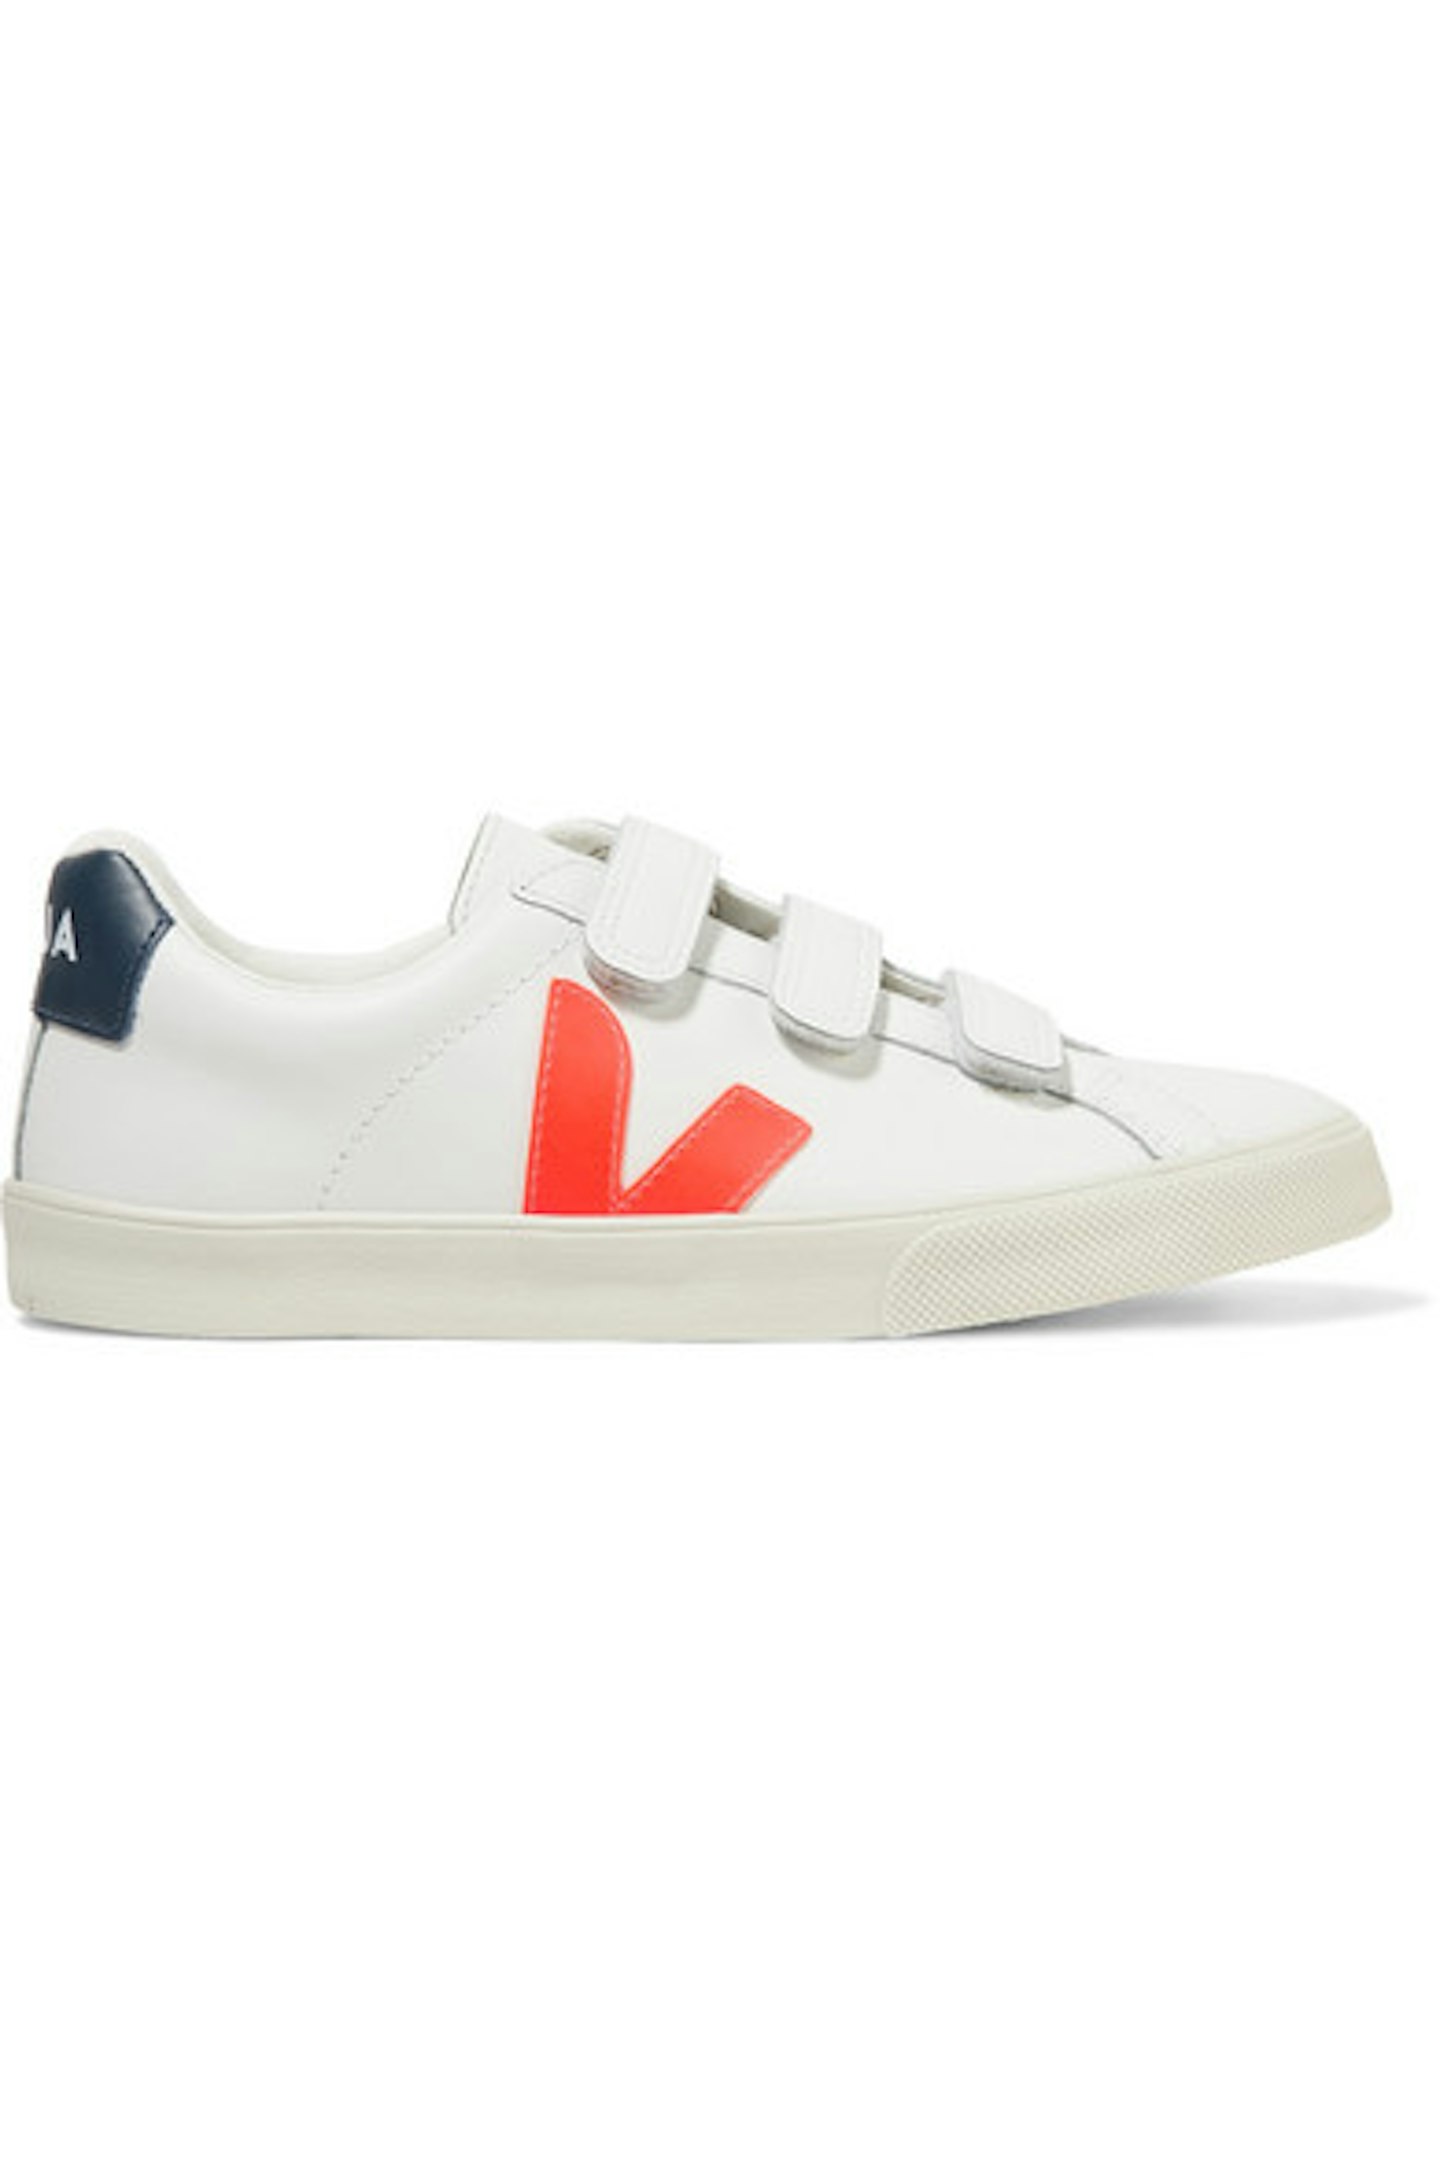 Veja + Net Sustain, Rubber-Trimmed Leather Sneakers, £100